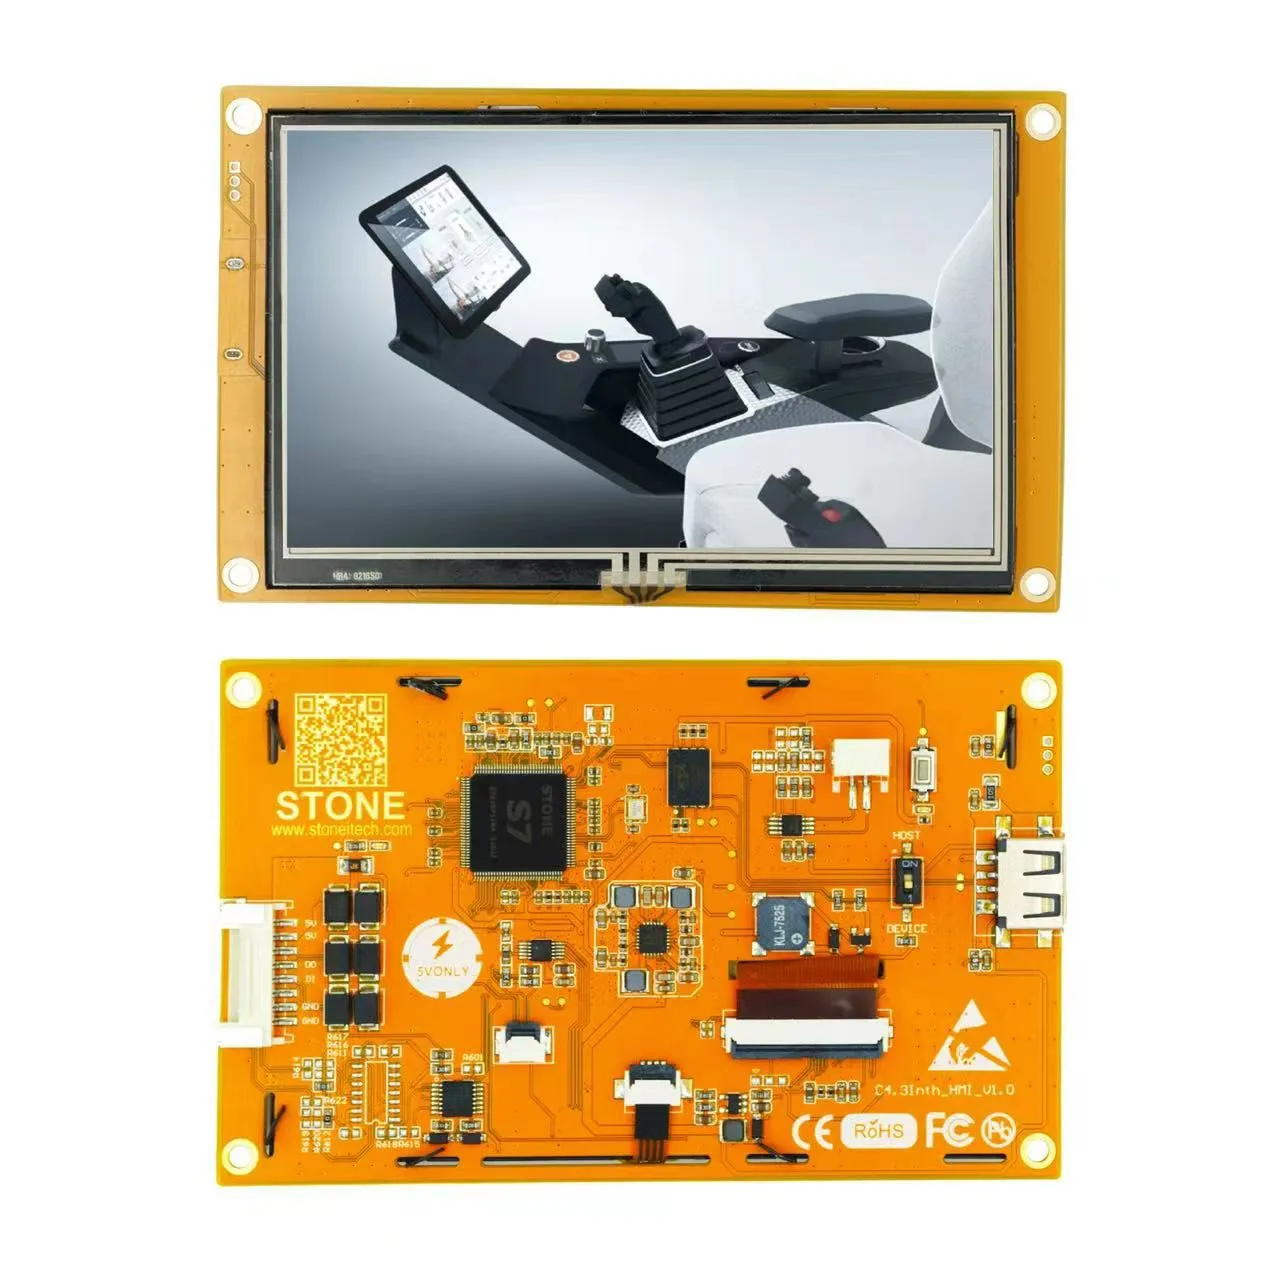 SCBRHMI 4.3 Inch LCD-TFT HMI Display Resistive Touch Panel Module Intelligent Series RGB 65K Color with Enclosure